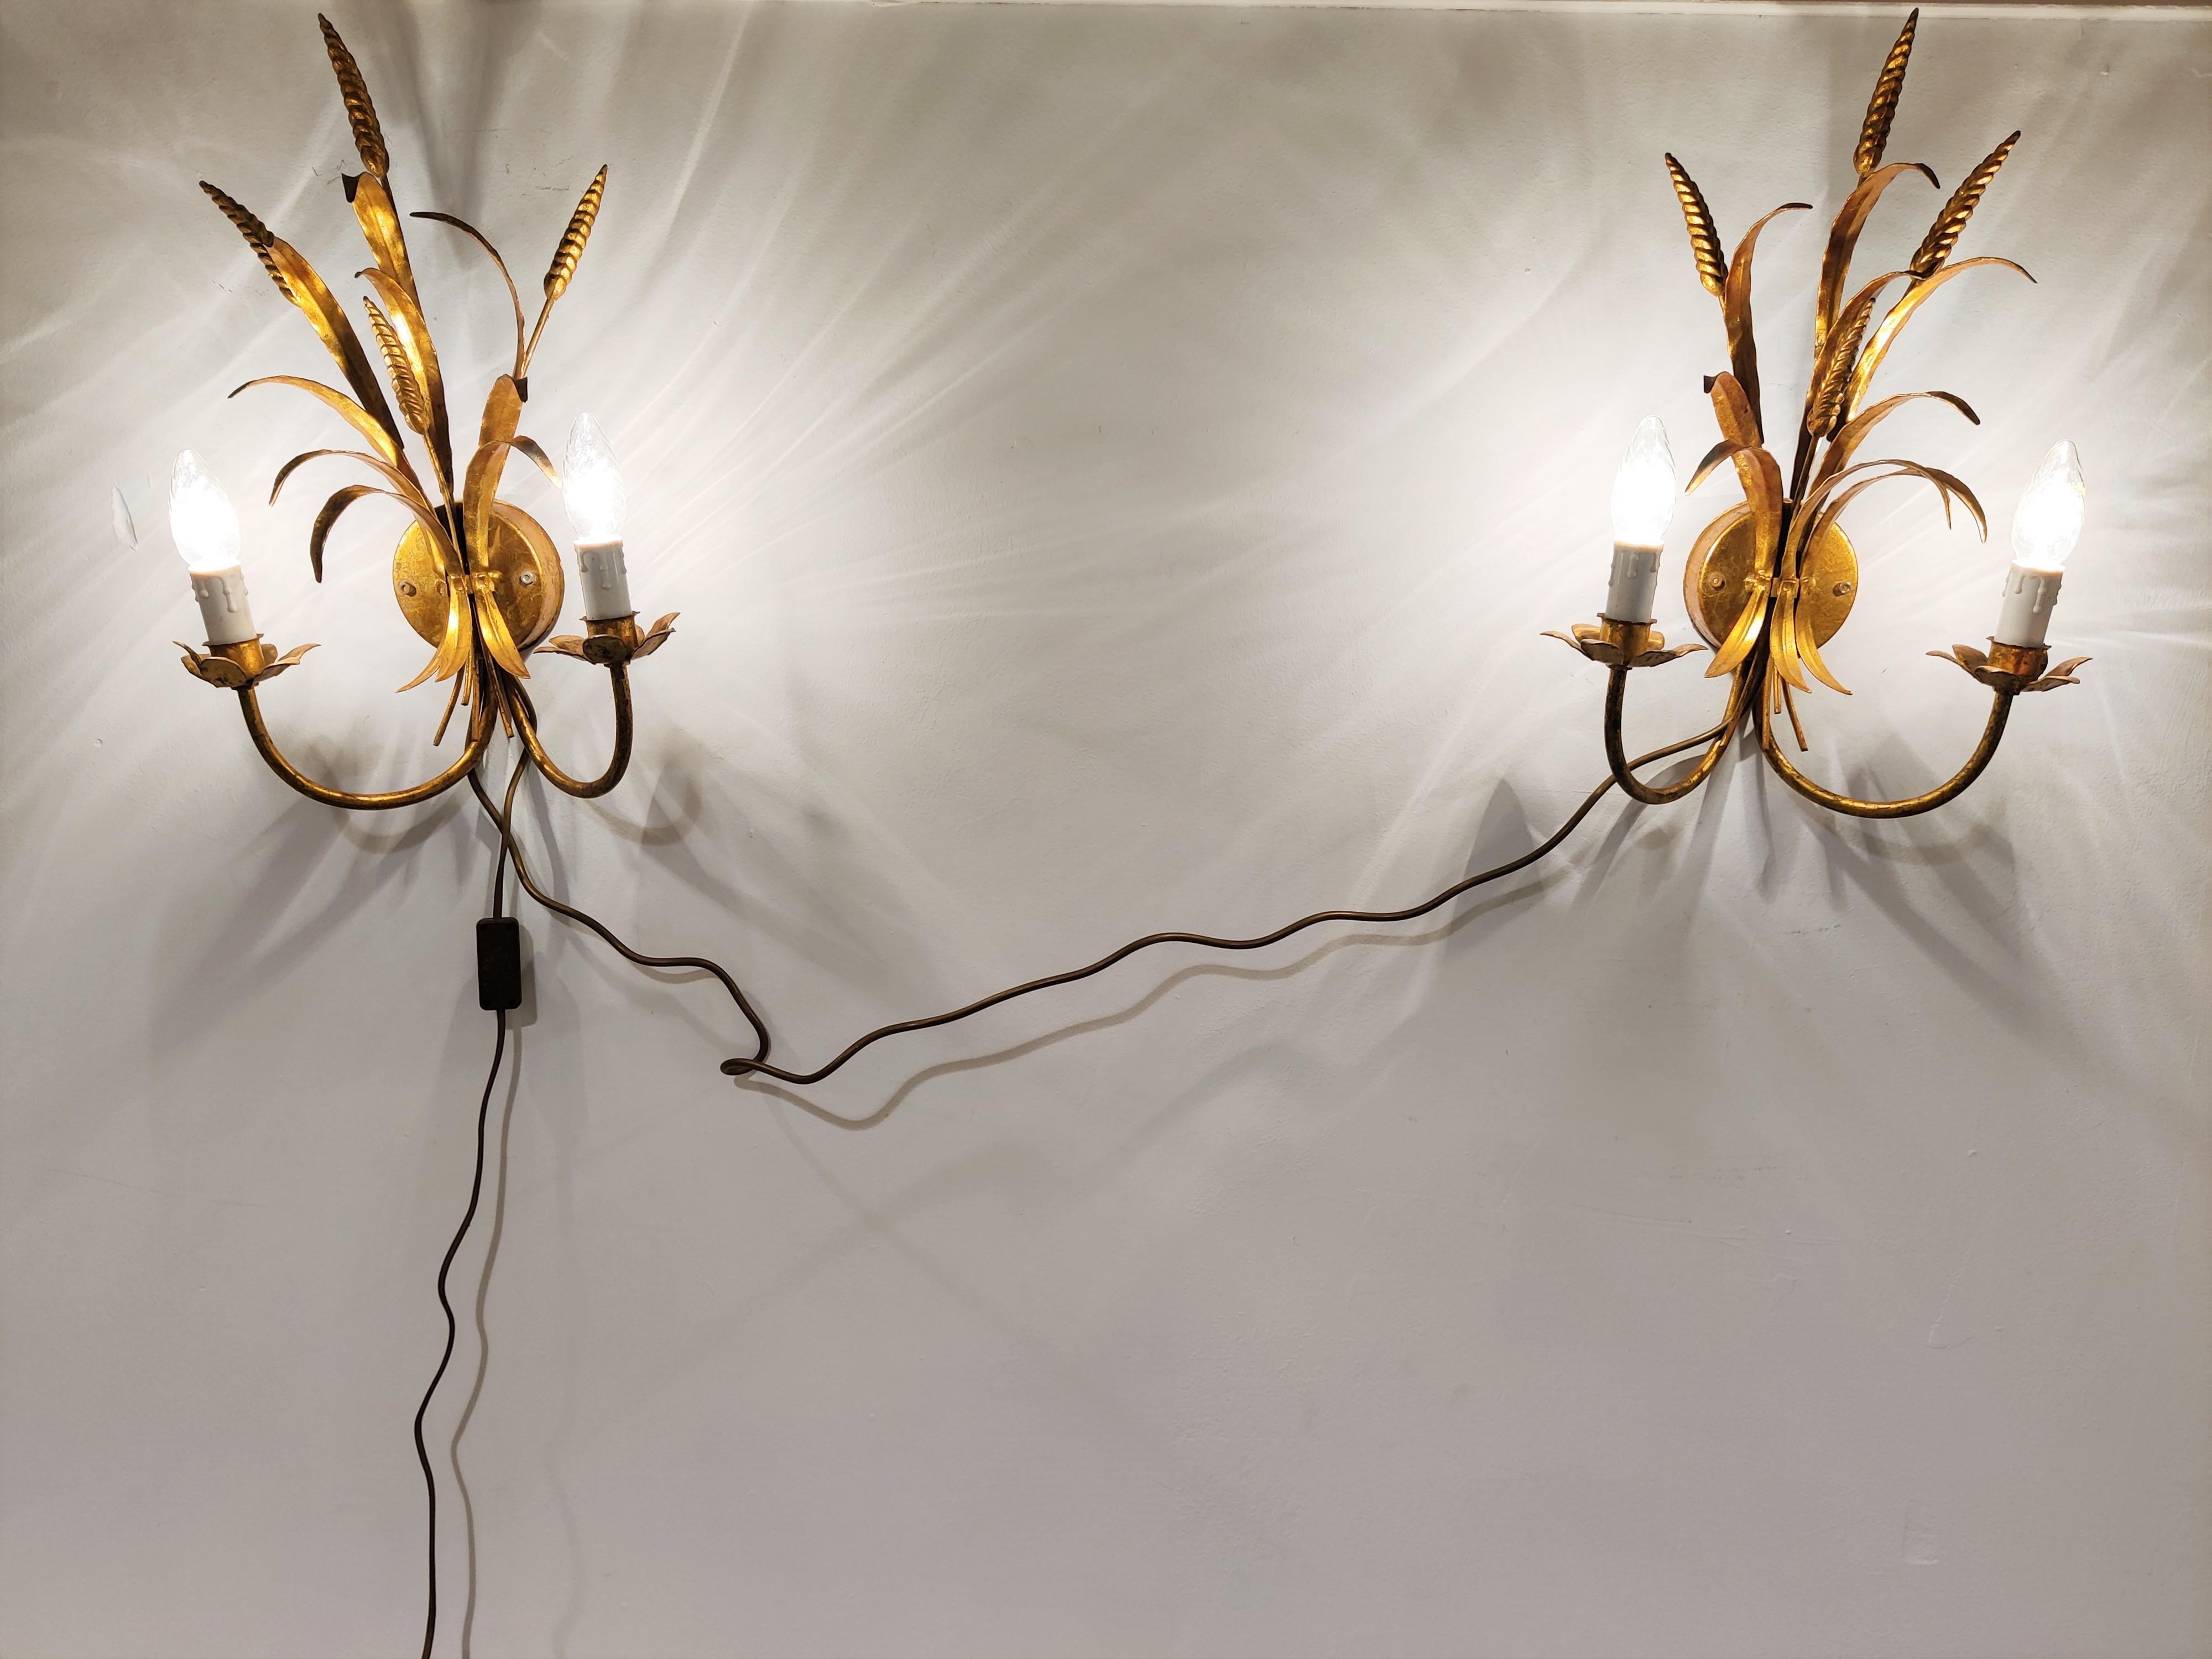 Pair of vintage gilt metal sheaf of wheat wall lamps made in italy in the 1960s.

They are used with E14 candelabra lamps.

Measures: Height: 46cm/18.11